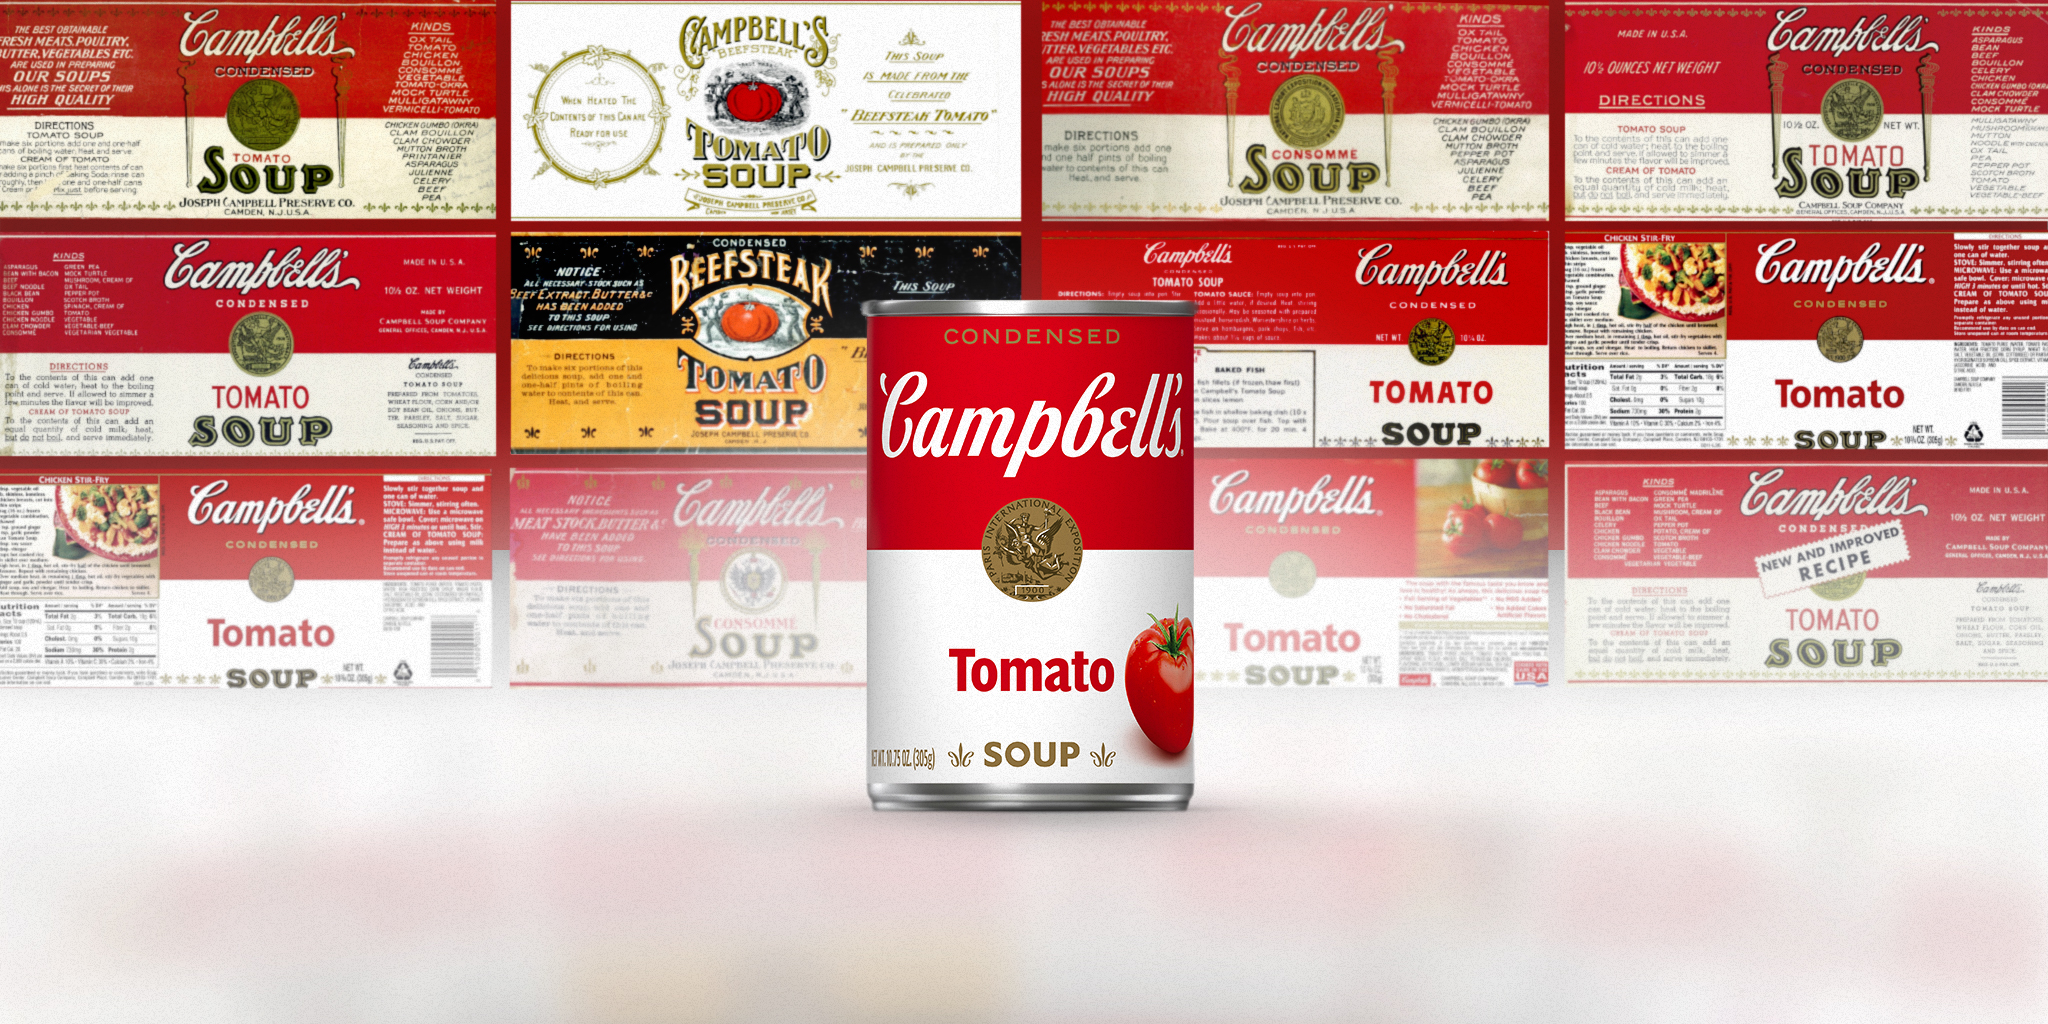 The new Campbell’s Condensed Soup Campbell Soup Company